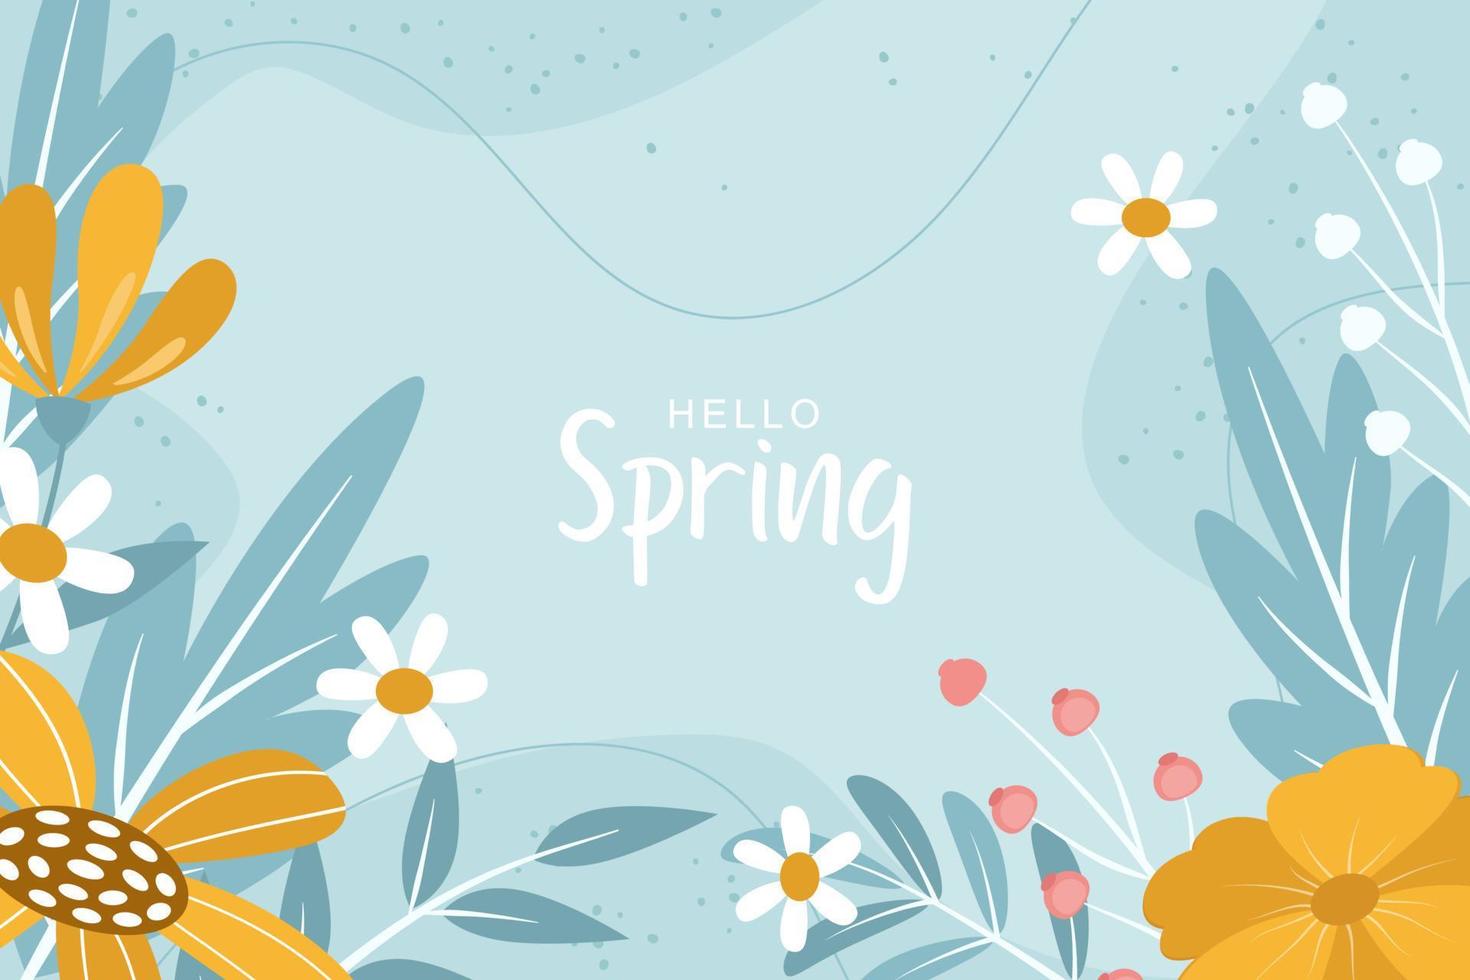 Beautiful spring background with hand drawn flowers vector